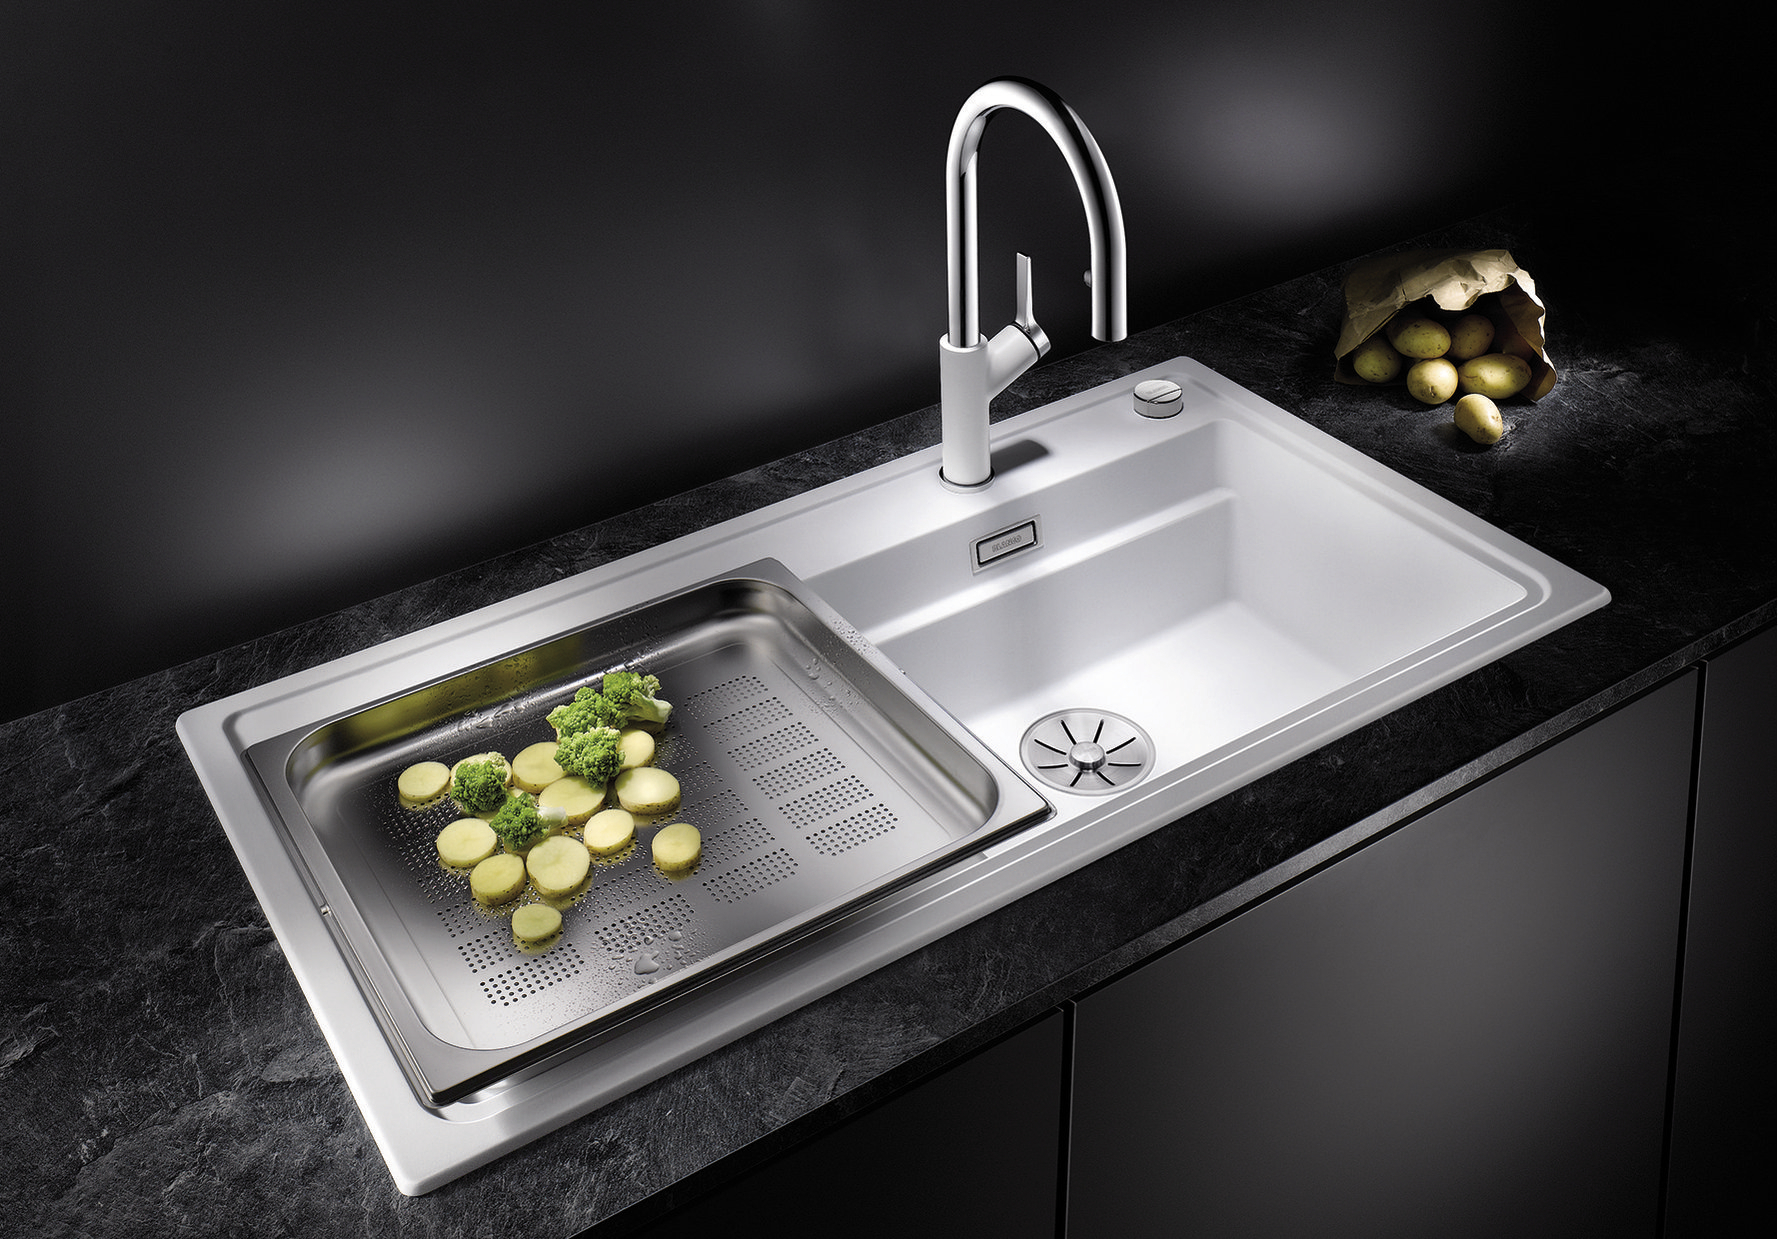 All in one: the BLANCO ZENOR offers space for all your kitchen tasks.